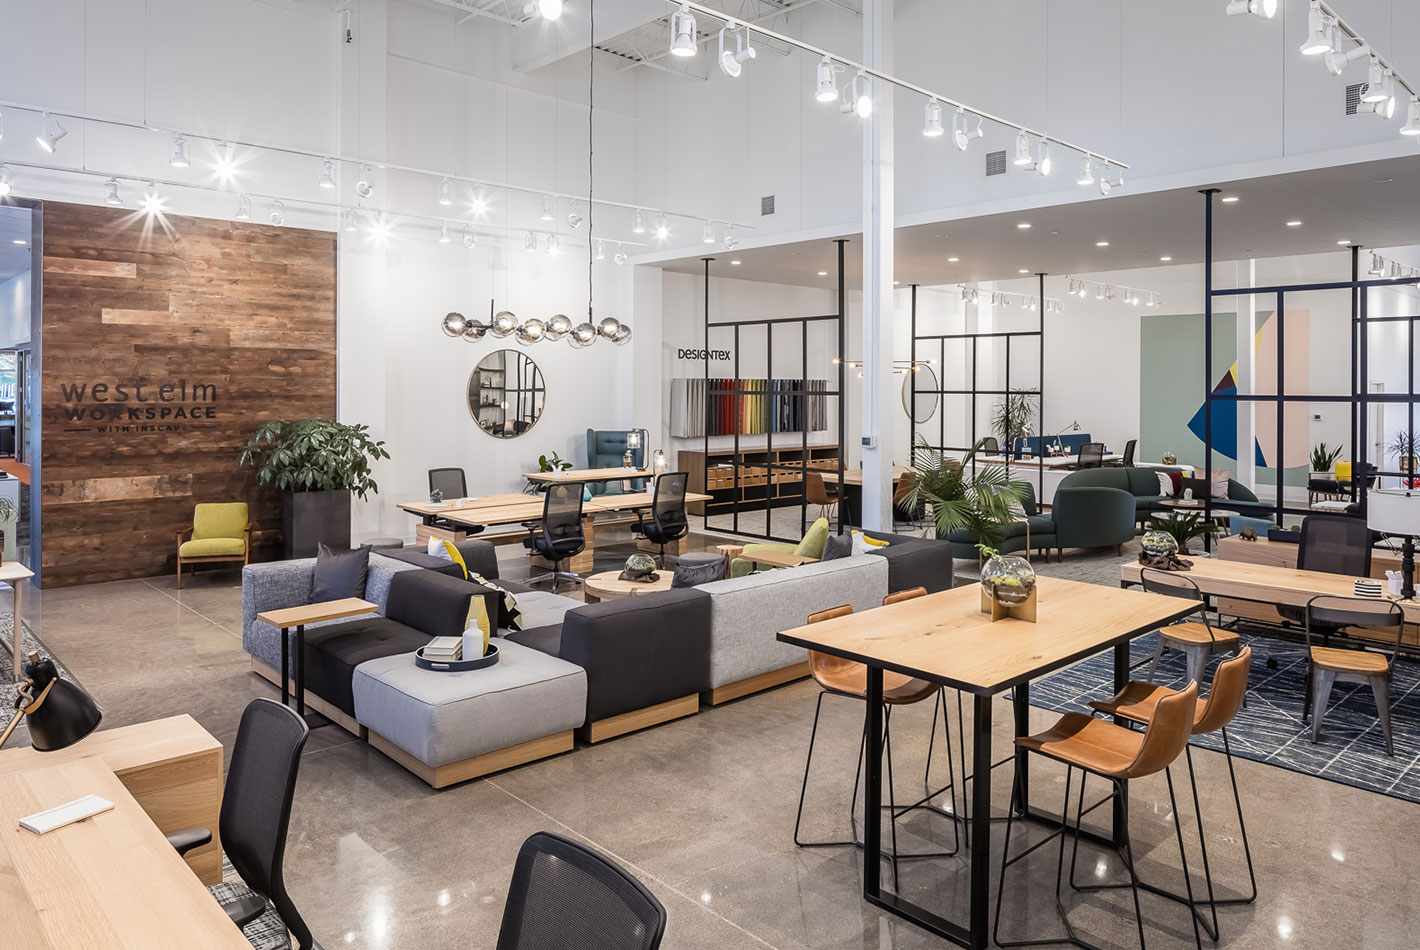 A wide angle shot of the entire West Elm Workspace showroom in Minneapolis. Multiple seating area, work areas, and casual spaces are arranged on a polished stone showroom floor